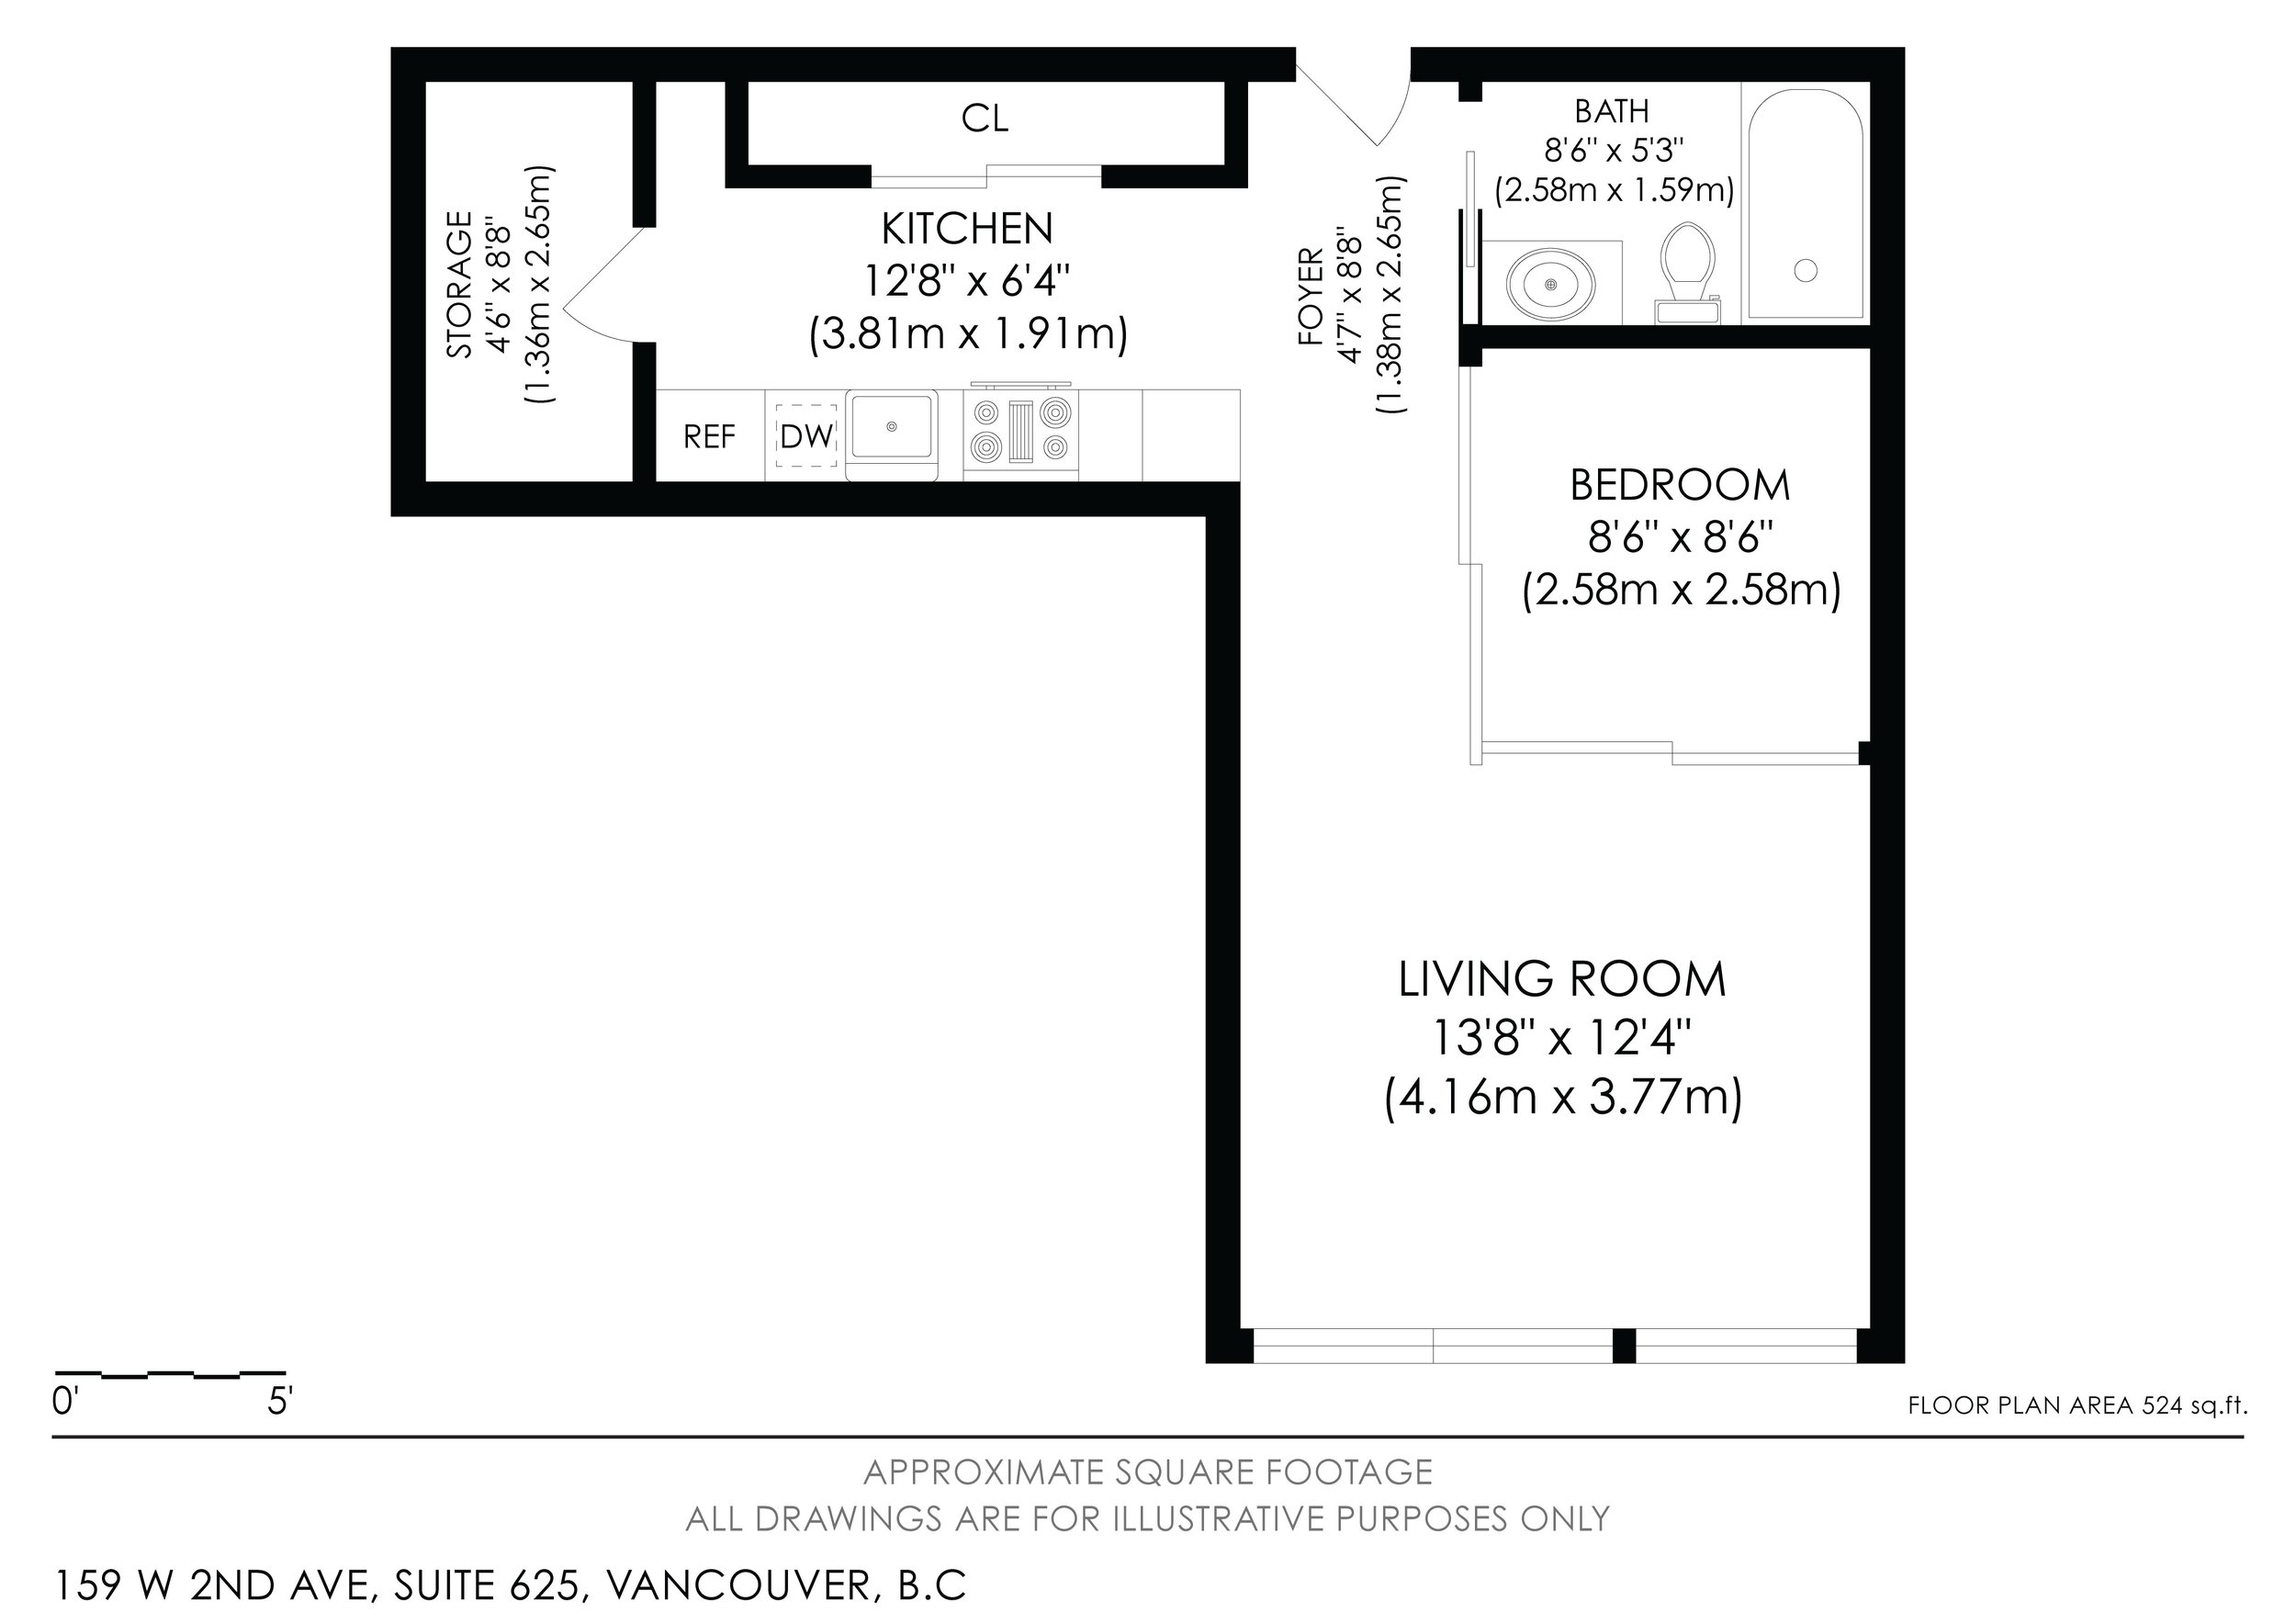 159 W 2nd Ave Suite 625 Vancouver BC.jpg